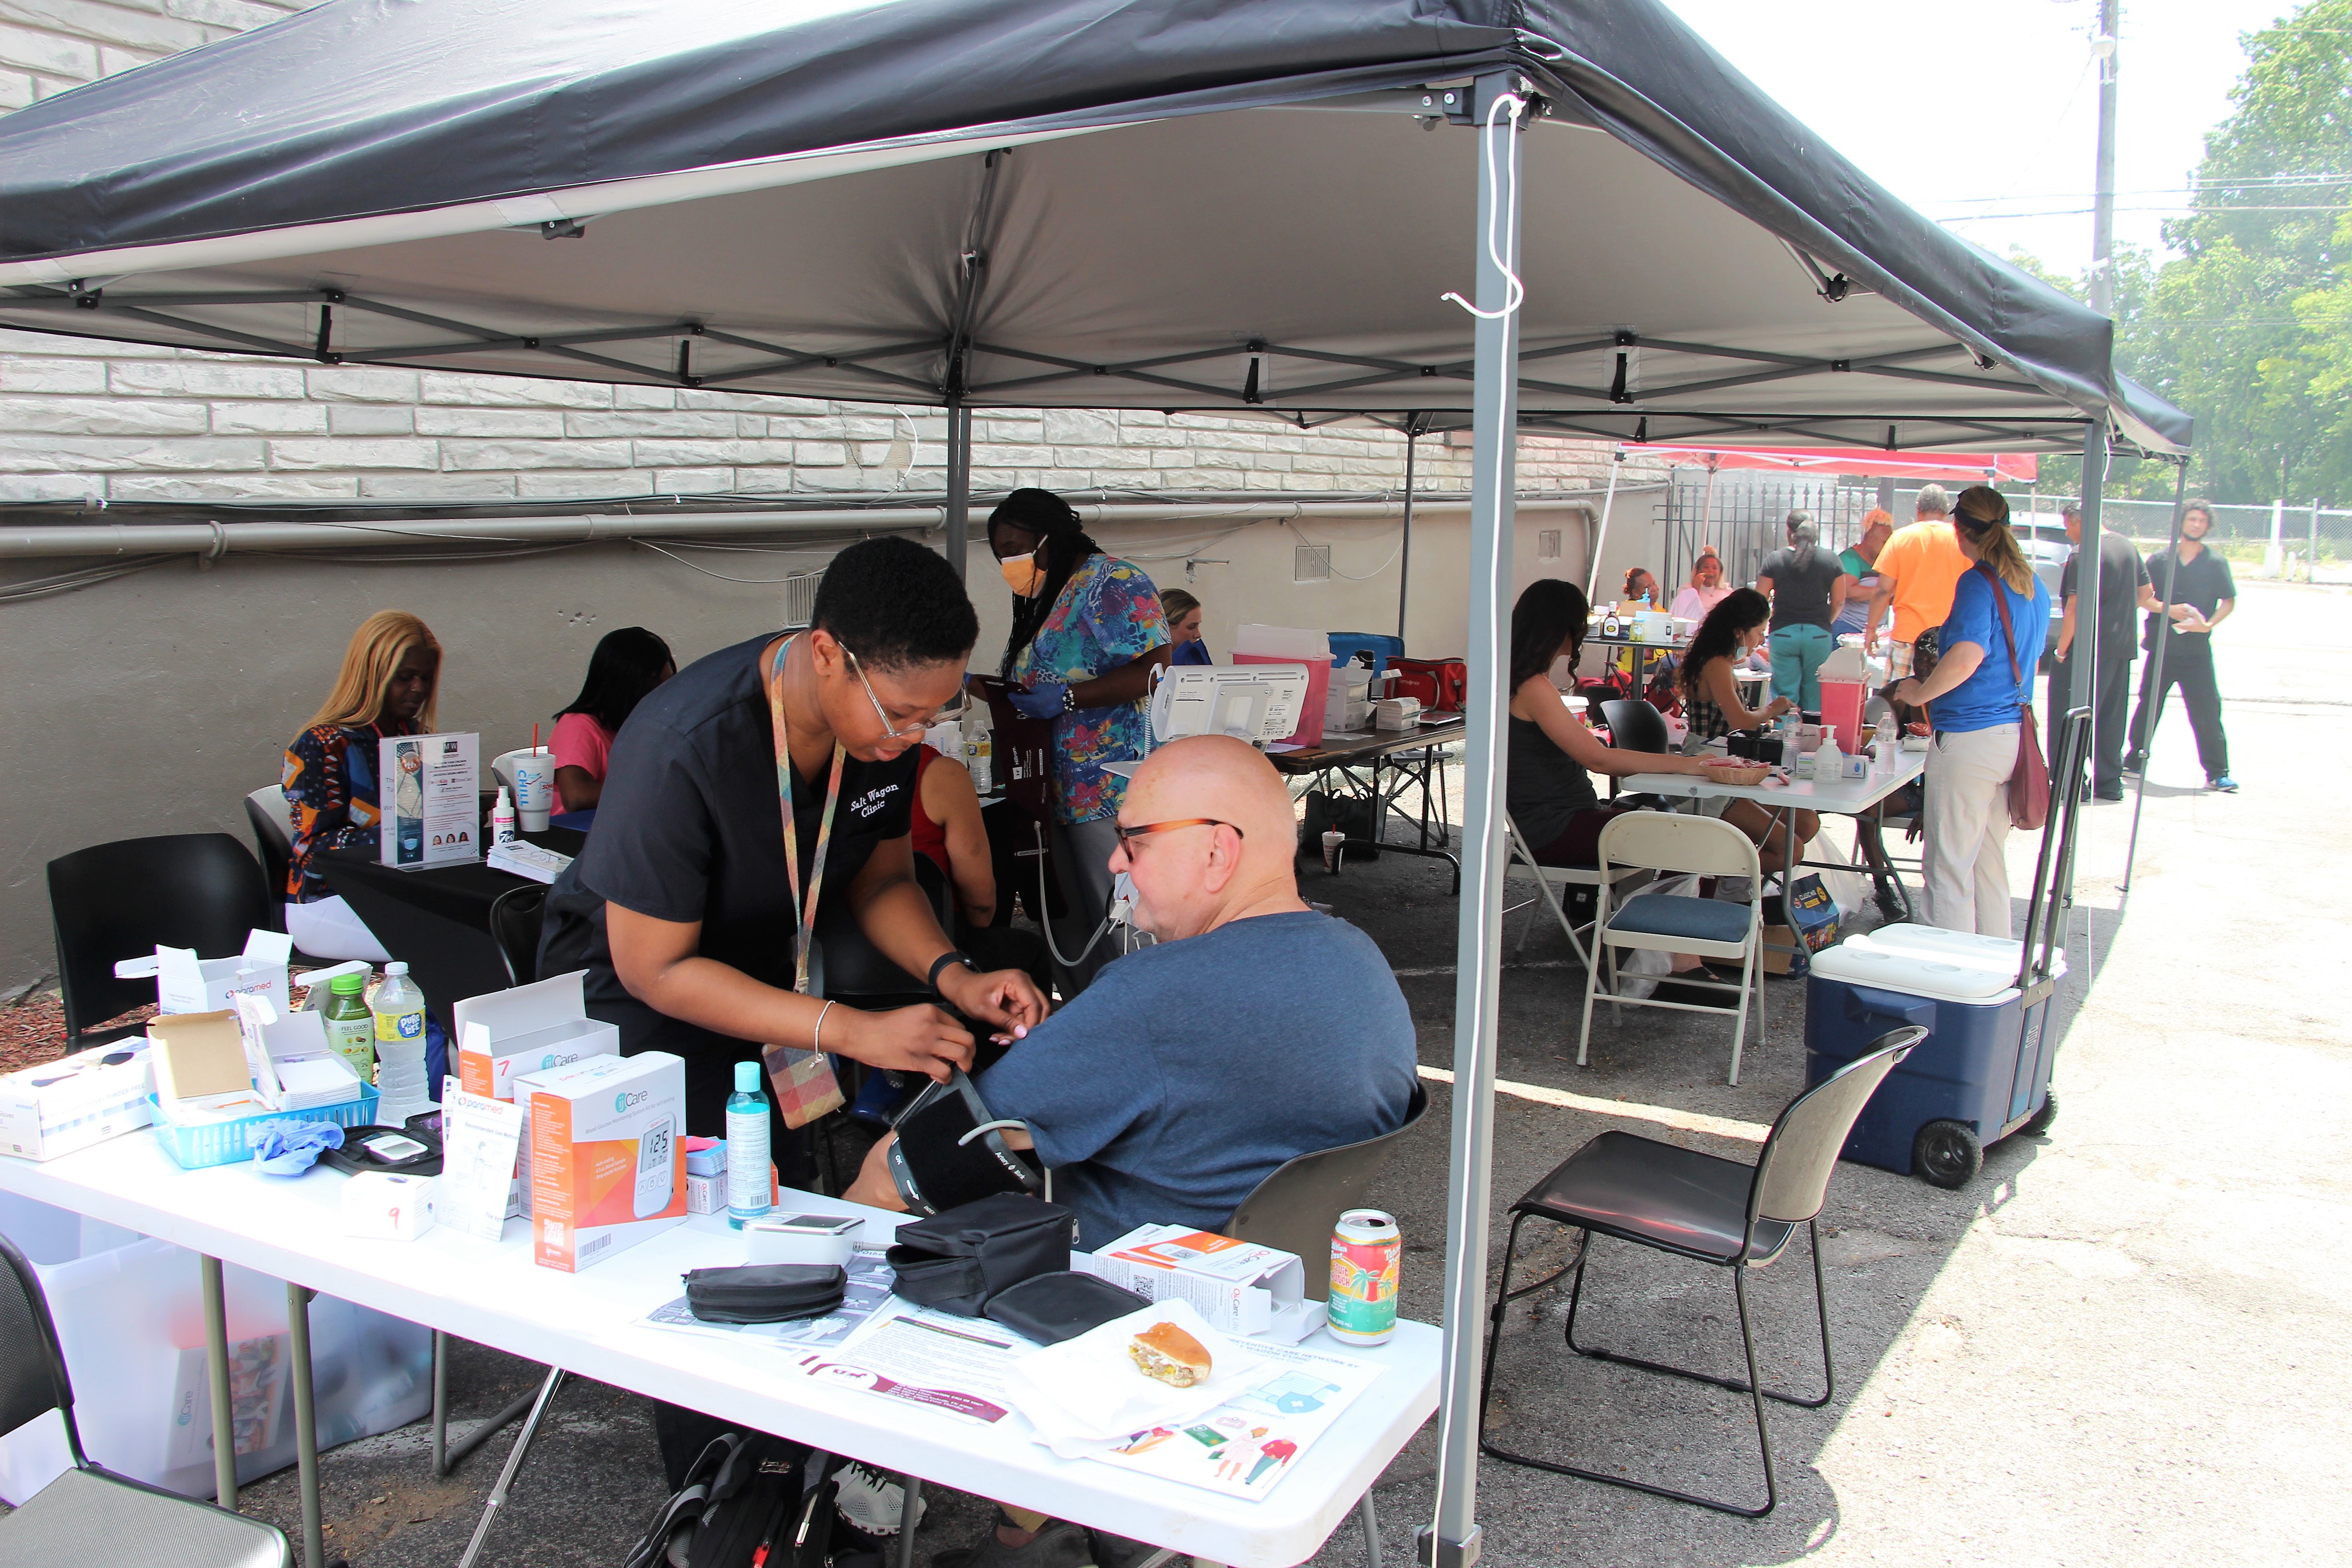 Health screening under a canopy tent